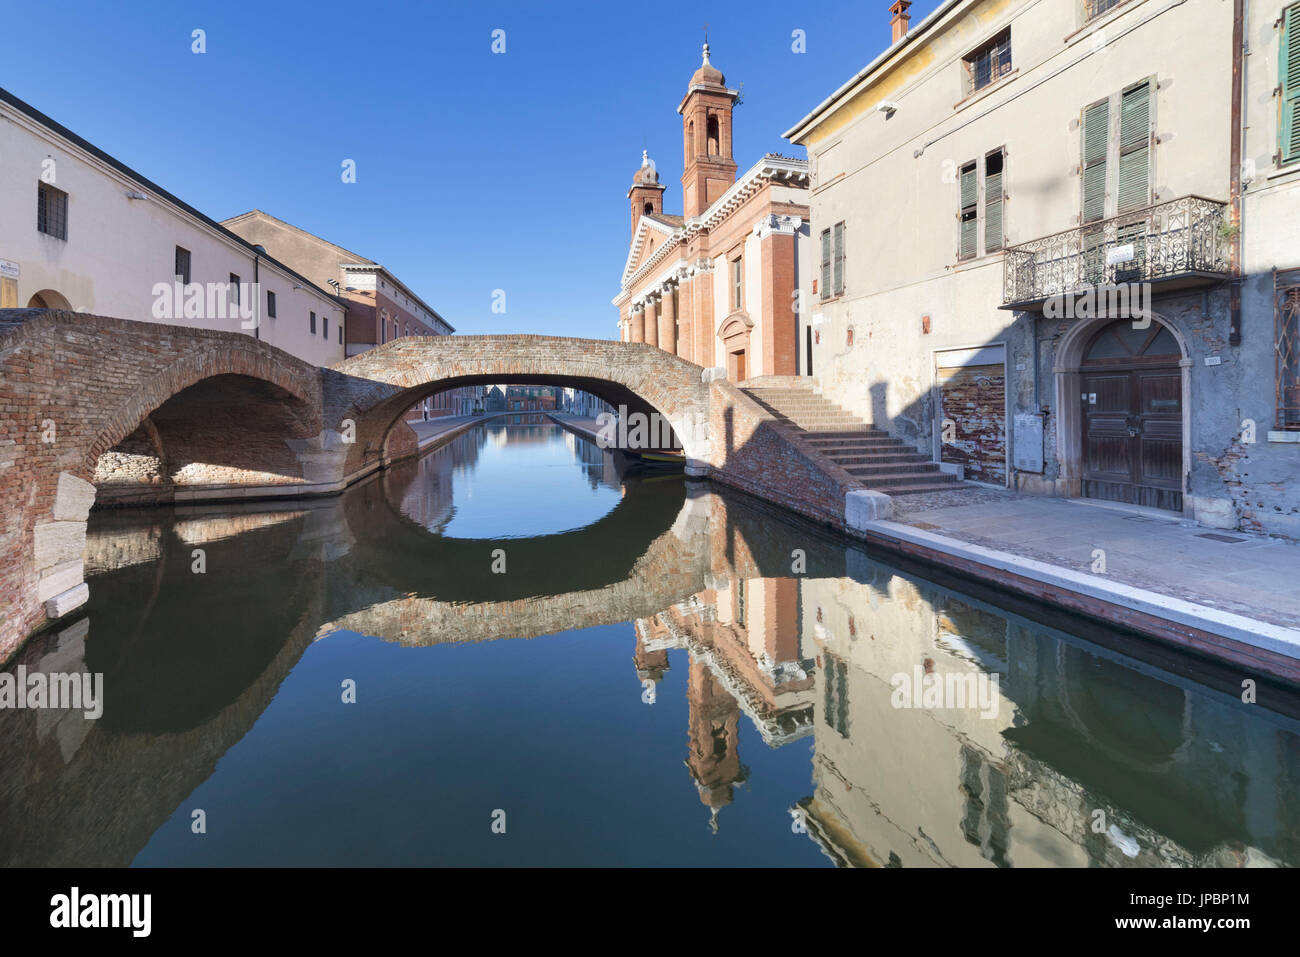 Europe, Italy, Emilia Romagna, Ferrara, Comacchio. Typical Small bricks bridges over the water canal and the St Peter church Stock Photo